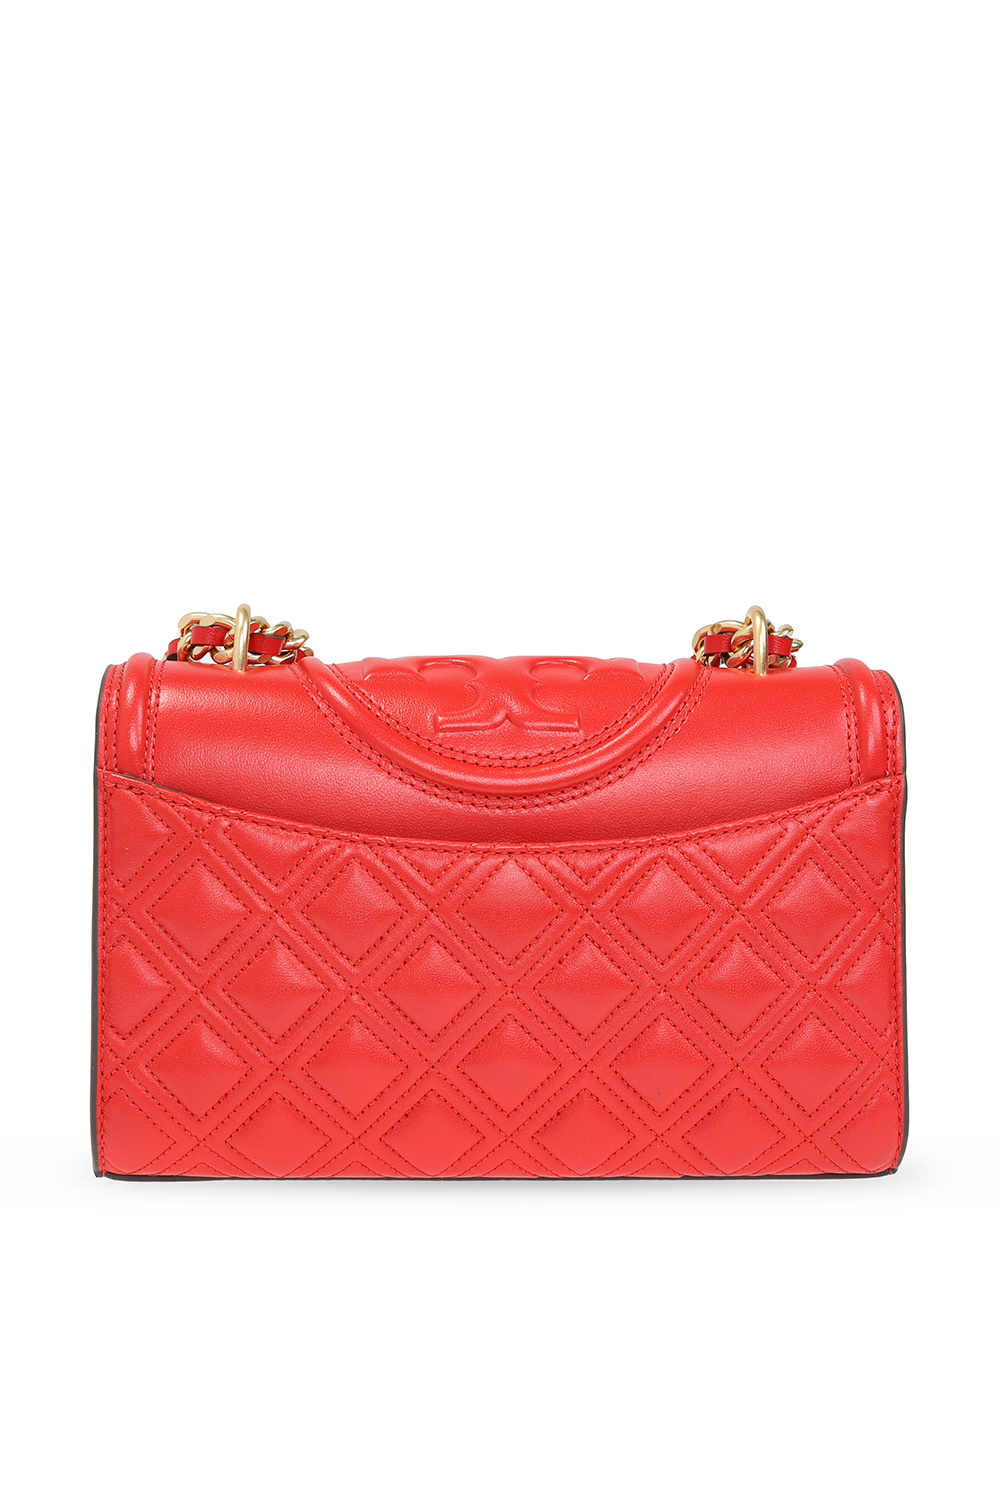 Tory Burch Fleming Small Shoulder Bag Red